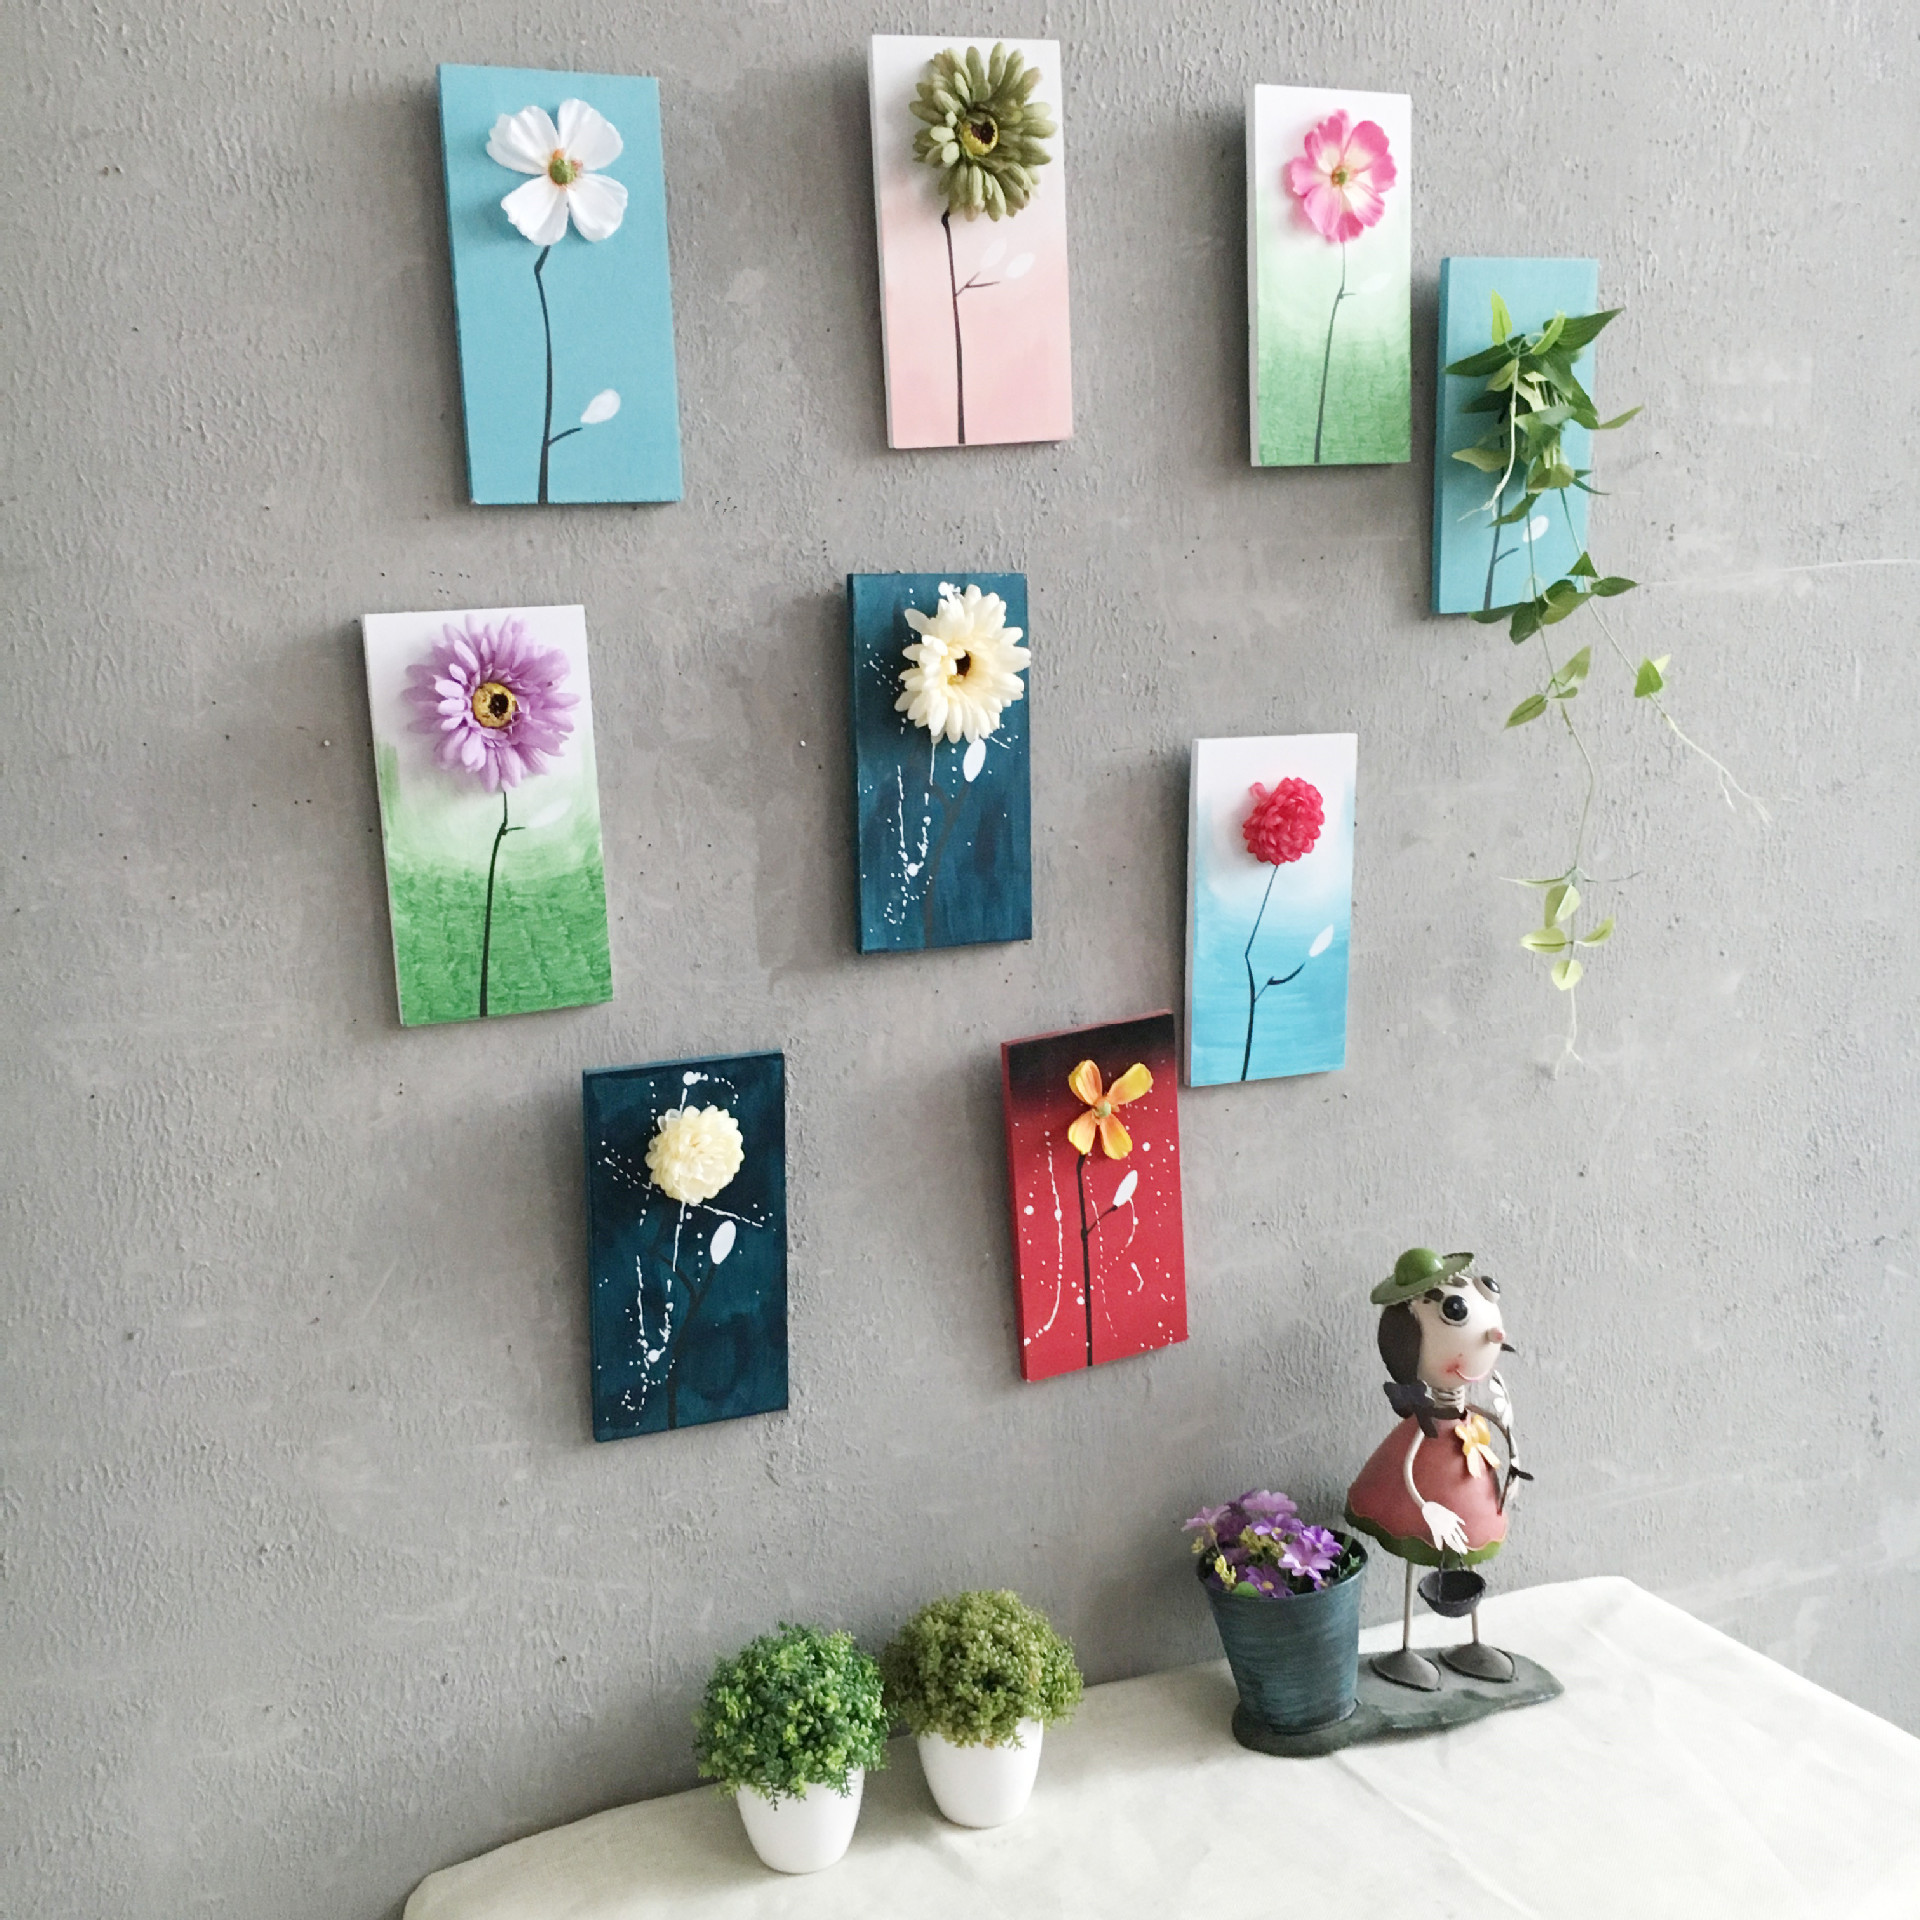 

22.5x11.5cm Village Board Painted Flower Creative Wall Bedroom Plants Pendant Haning Decorations